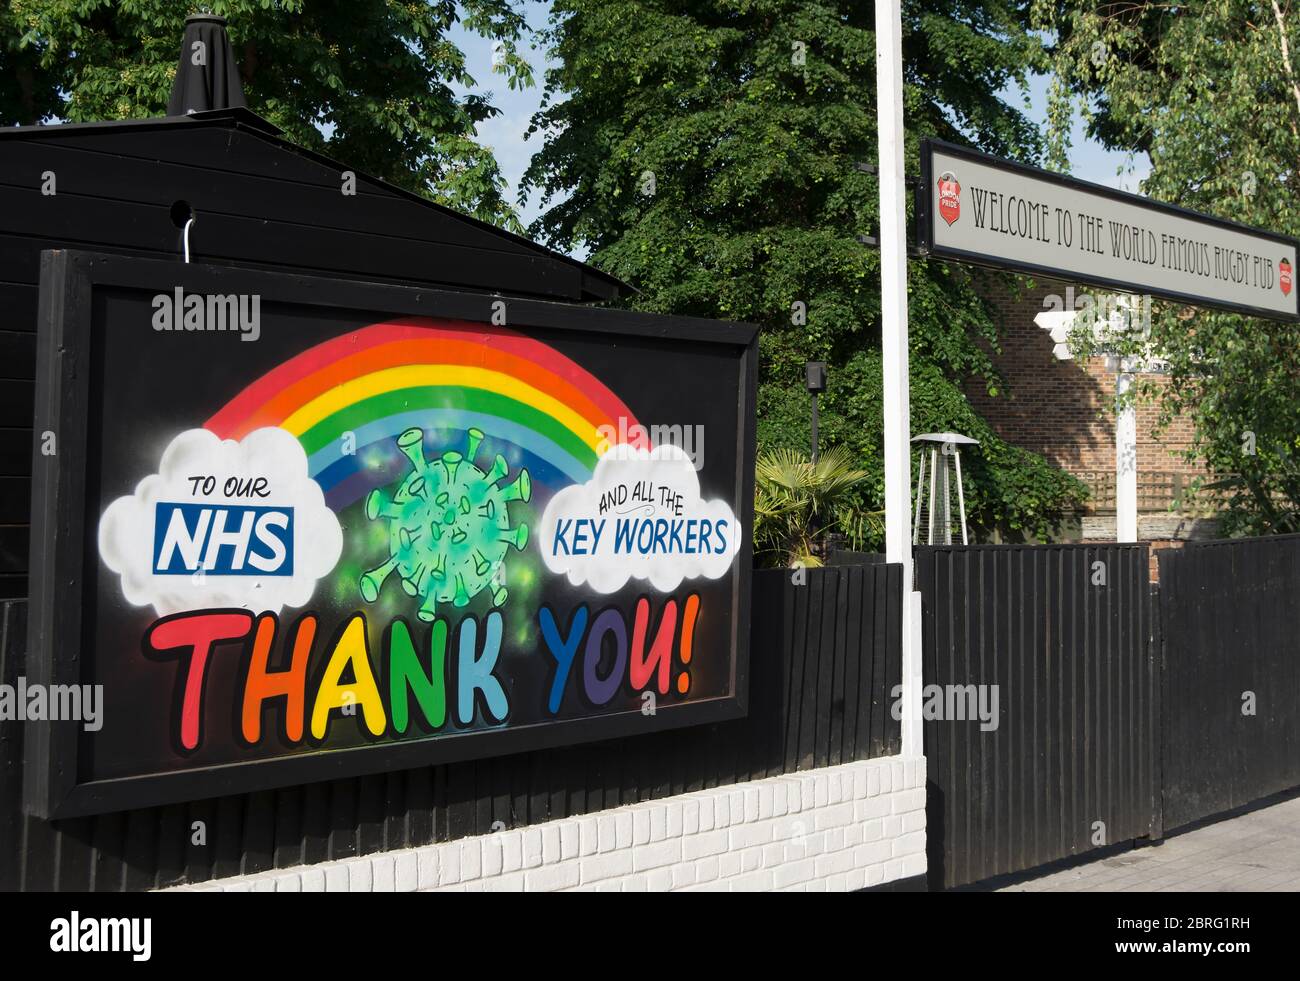 painted rainbow and thank you message for nhs staff and key workers during the covid 19 lockdown, cabbage patch pub, twickenham, england Stock Photo